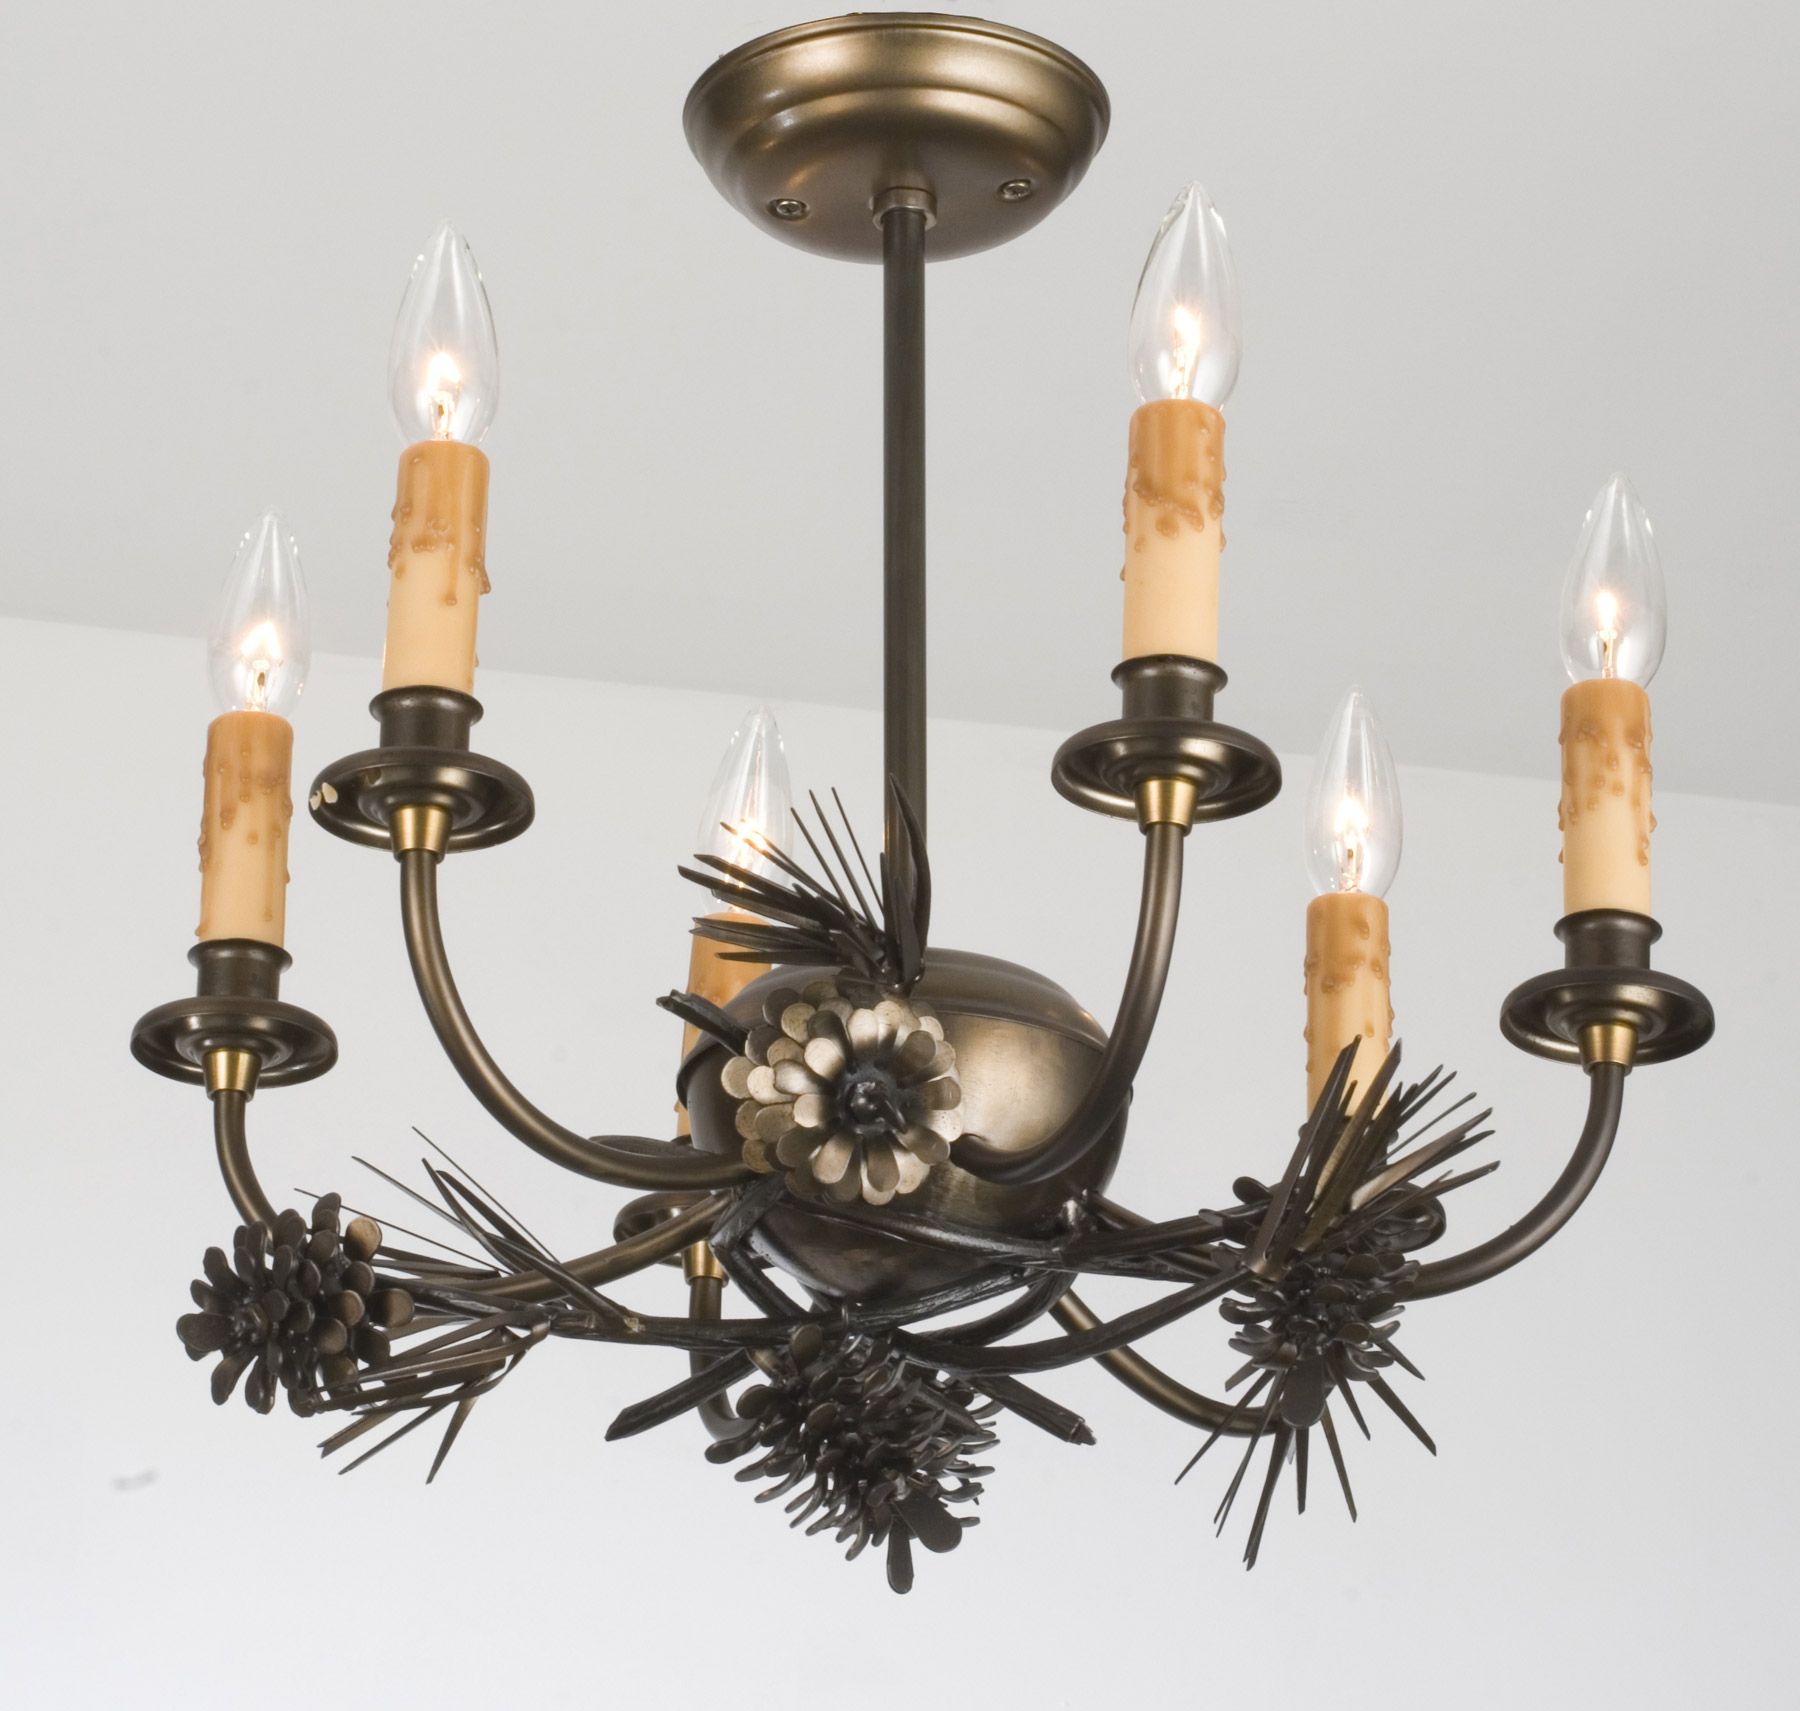 Meyda 38330 Woodland Pine Six Light Mini Chandelier Within Widely Used Six Light Chandeliers (View 5 of 20)